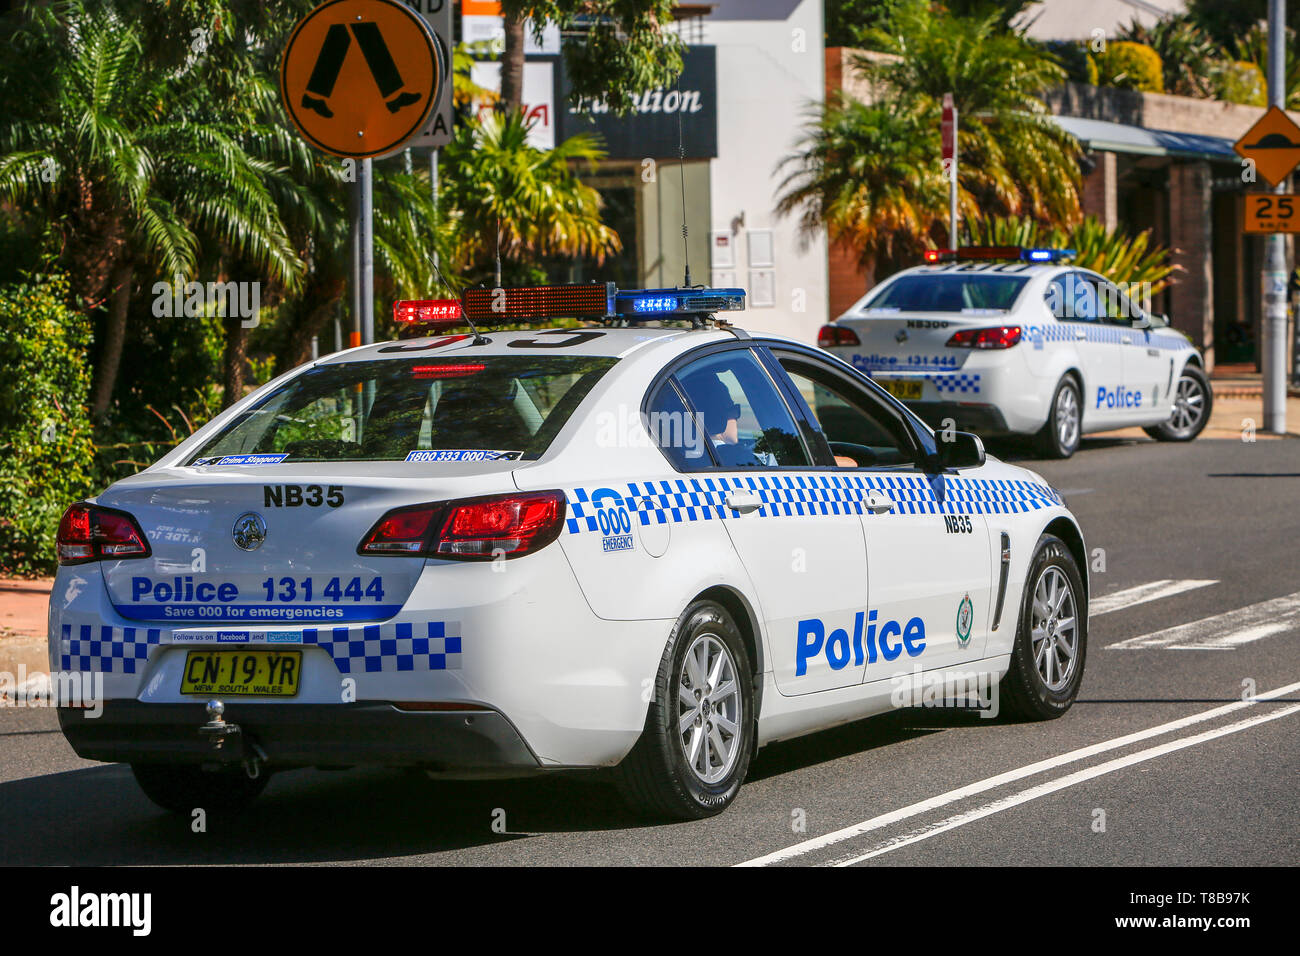 Australian police car, New South Wales police cars vehicles parked in Sydney,NSW, Australia Stock Photo